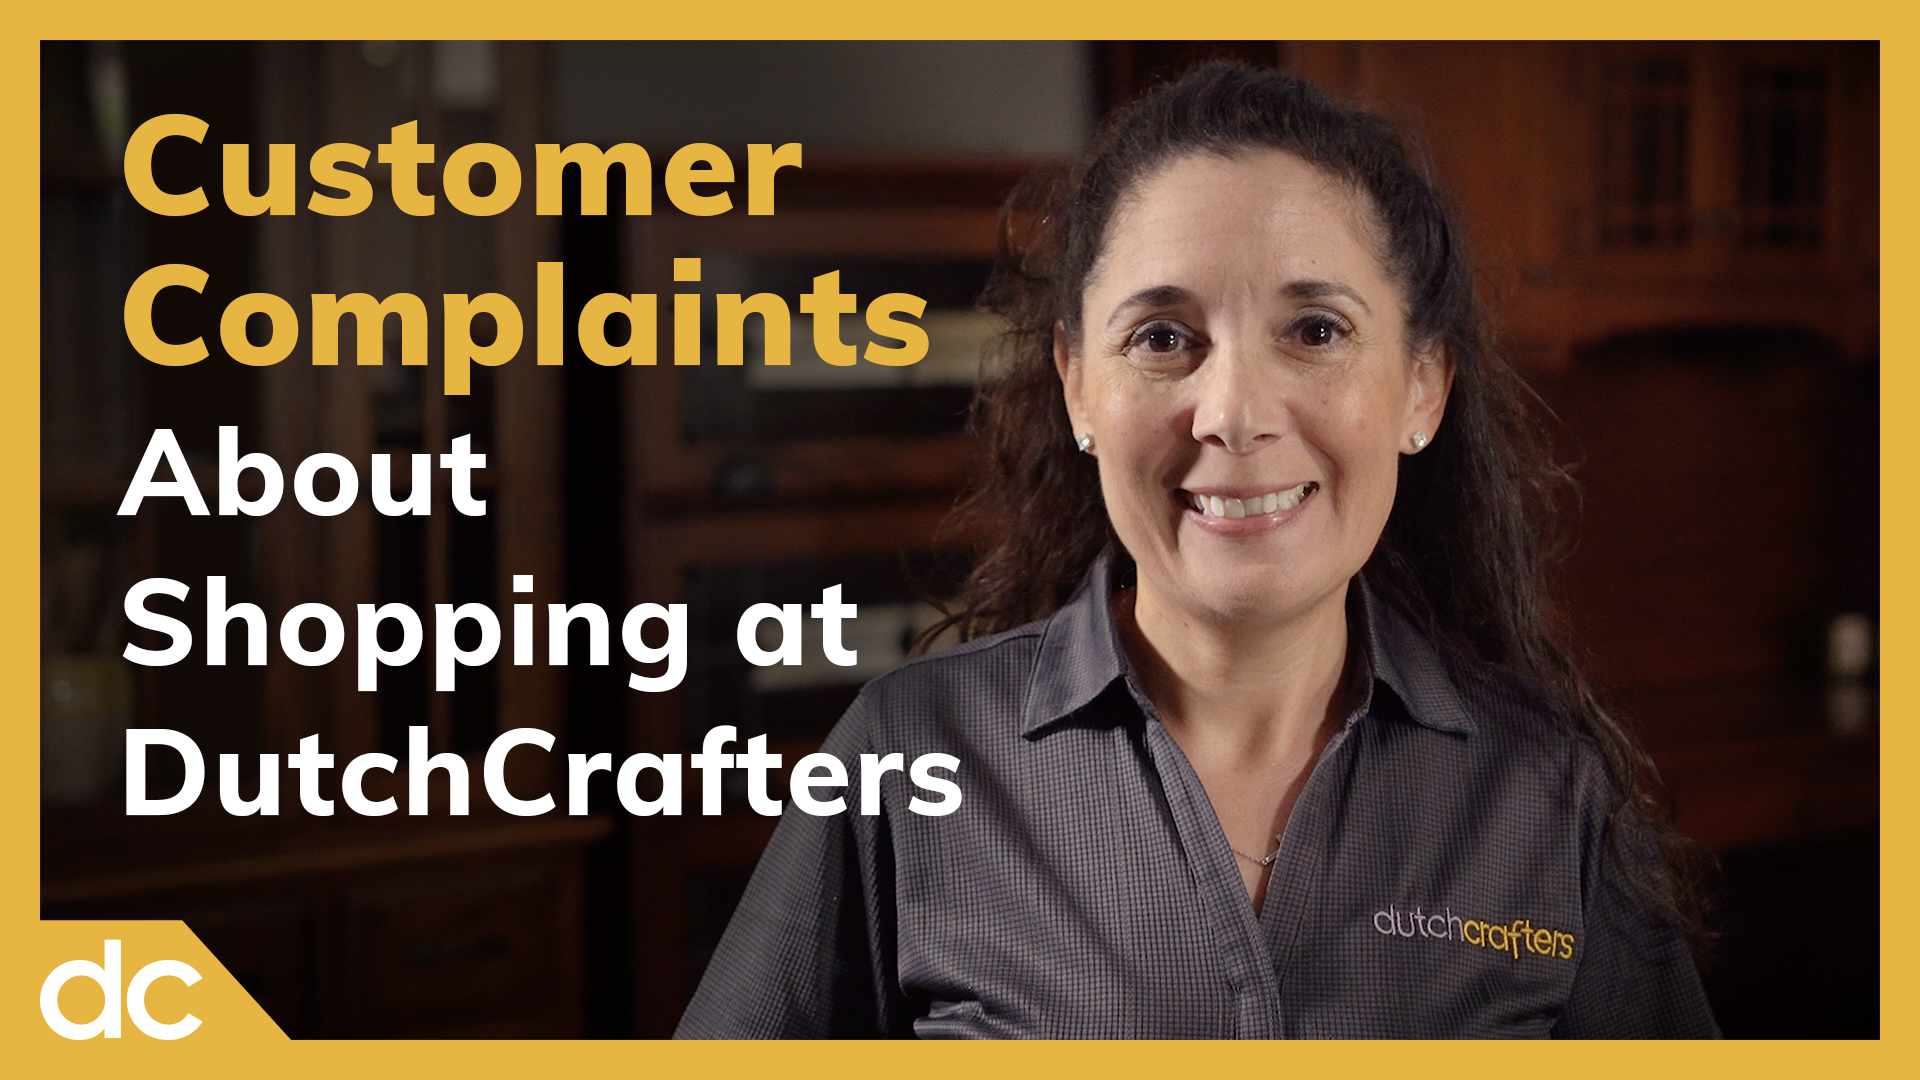 Customer complaints about shopping at DutchCrafters